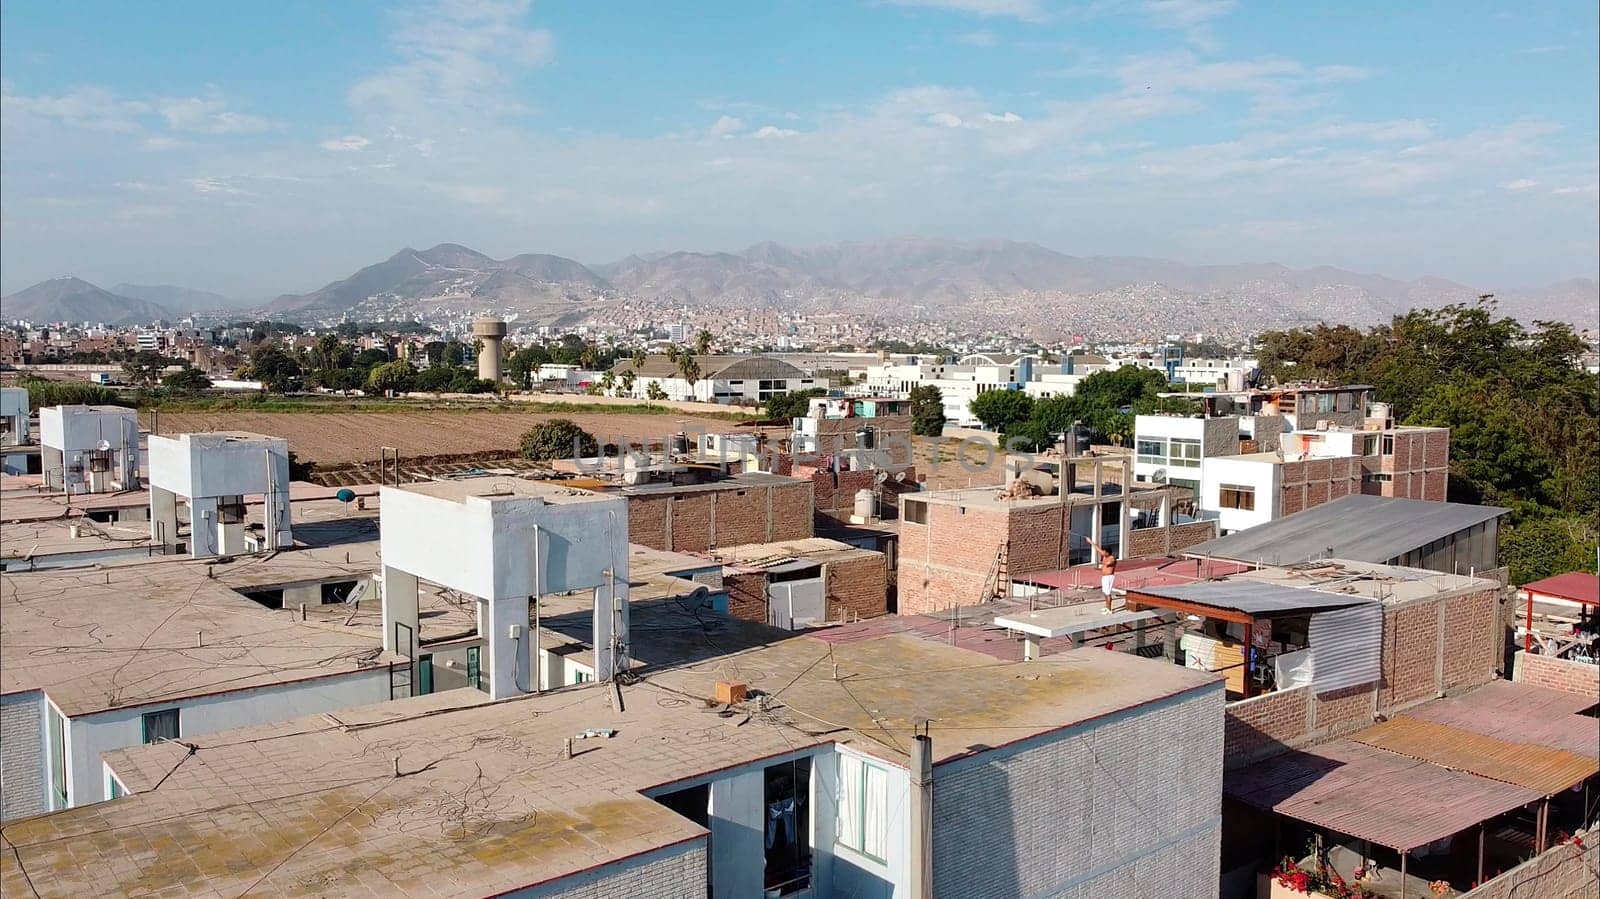 Aerial view of a sprawling urban area with residential buildings and distant mountains